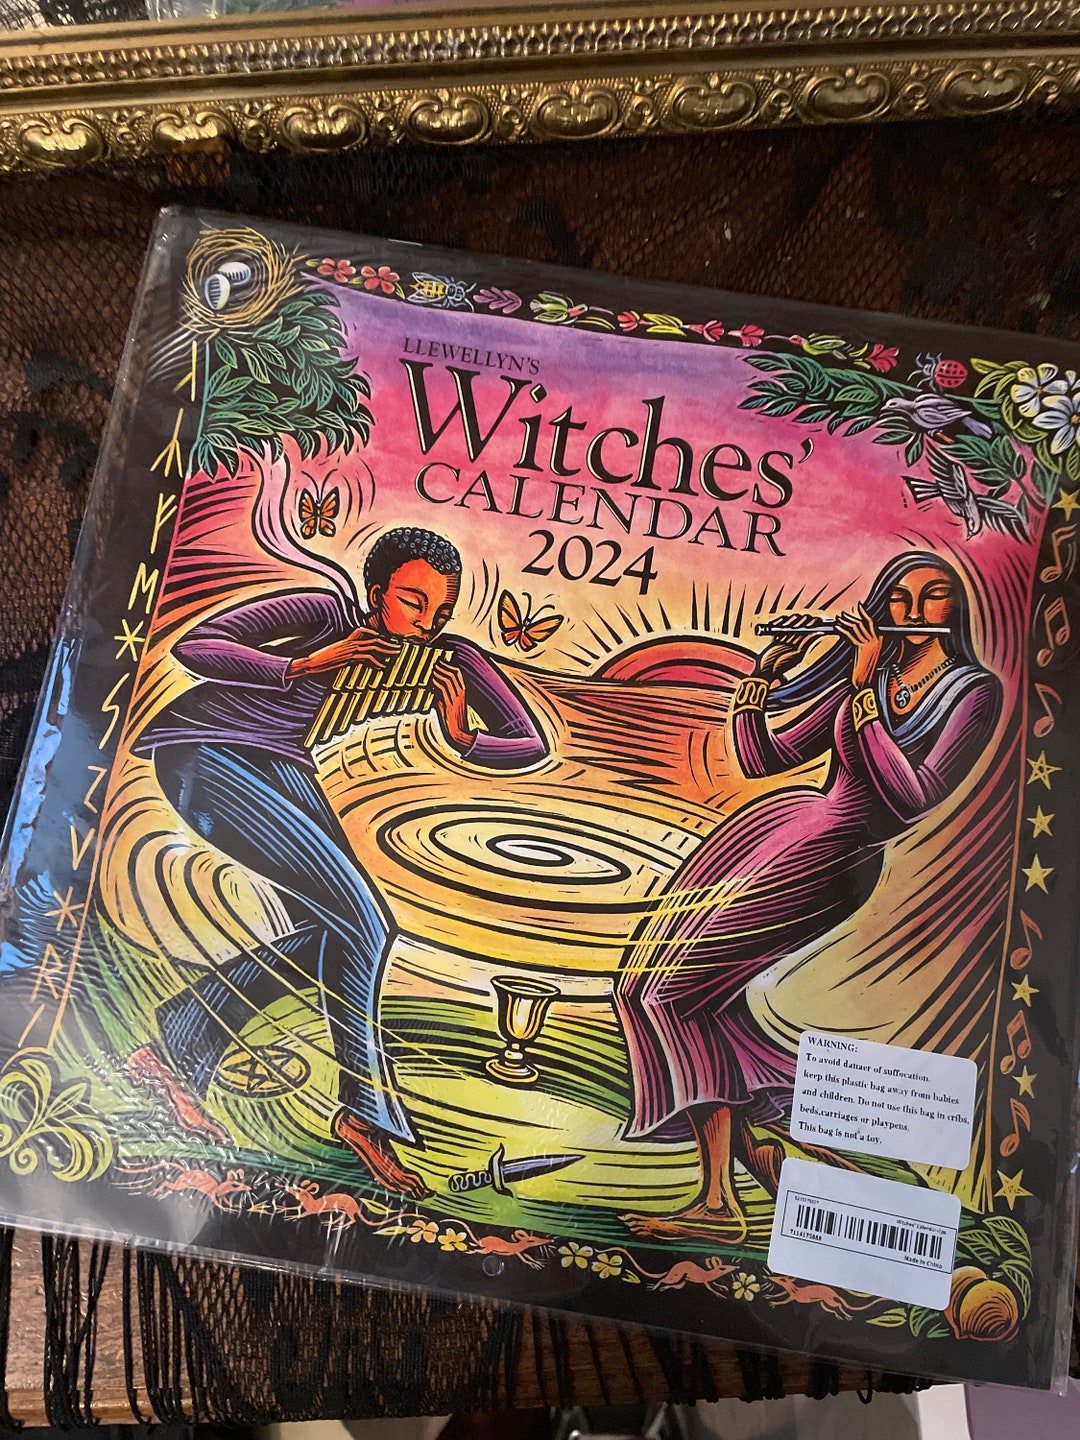 Llewellyns Witches Calendar 2024 Etsy